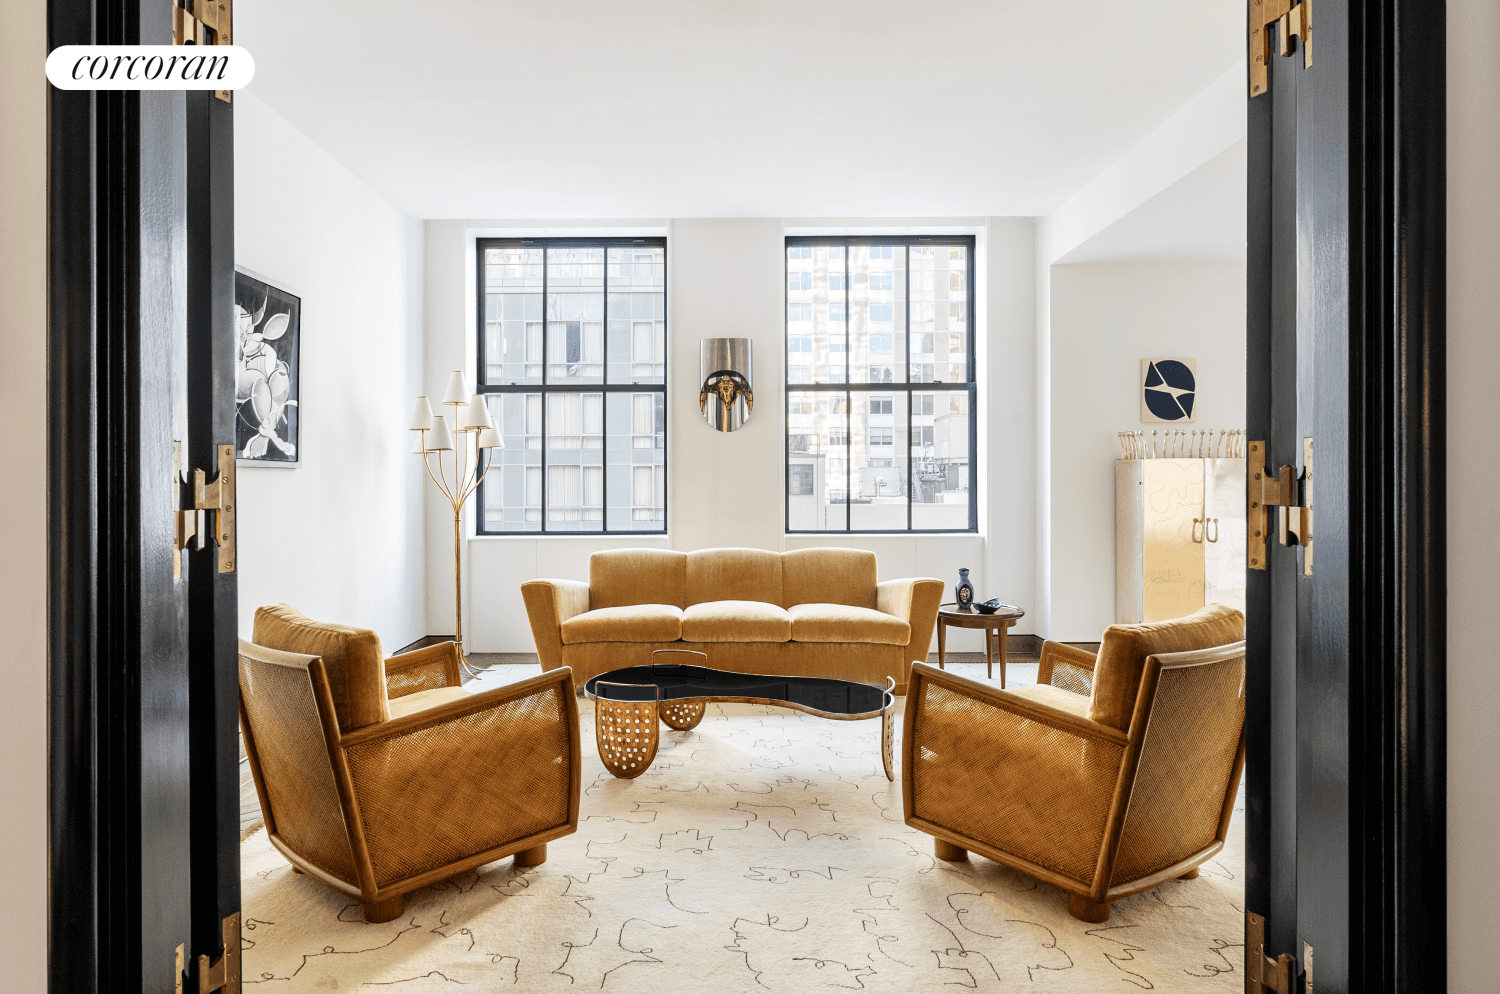 IMMEDIATE OCCUPANCYAvailable for immediate occupancy, Landmark Residence 11A at 111 West 57th Street provides an unparalleled opportunity for one who enjoys modern conveniences within grand spaces reminiscent of the pre ...